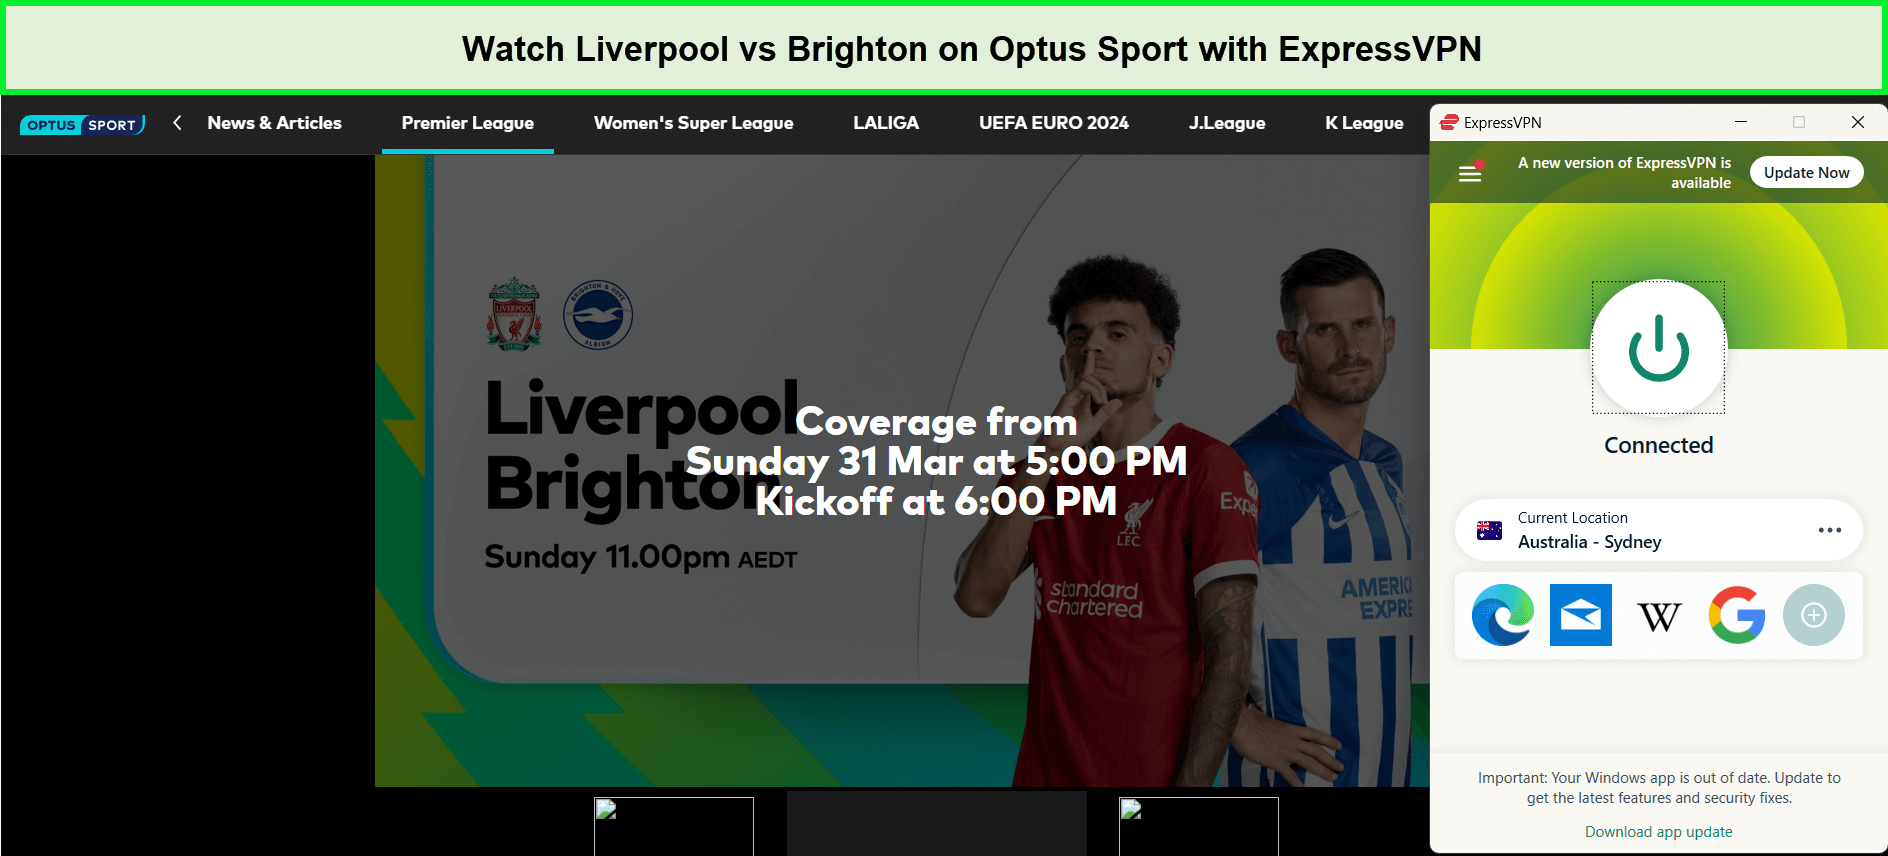 watch-Liverpool-vs-Brighton-in-Italy-on-Optus-Sport-with-expressvpn